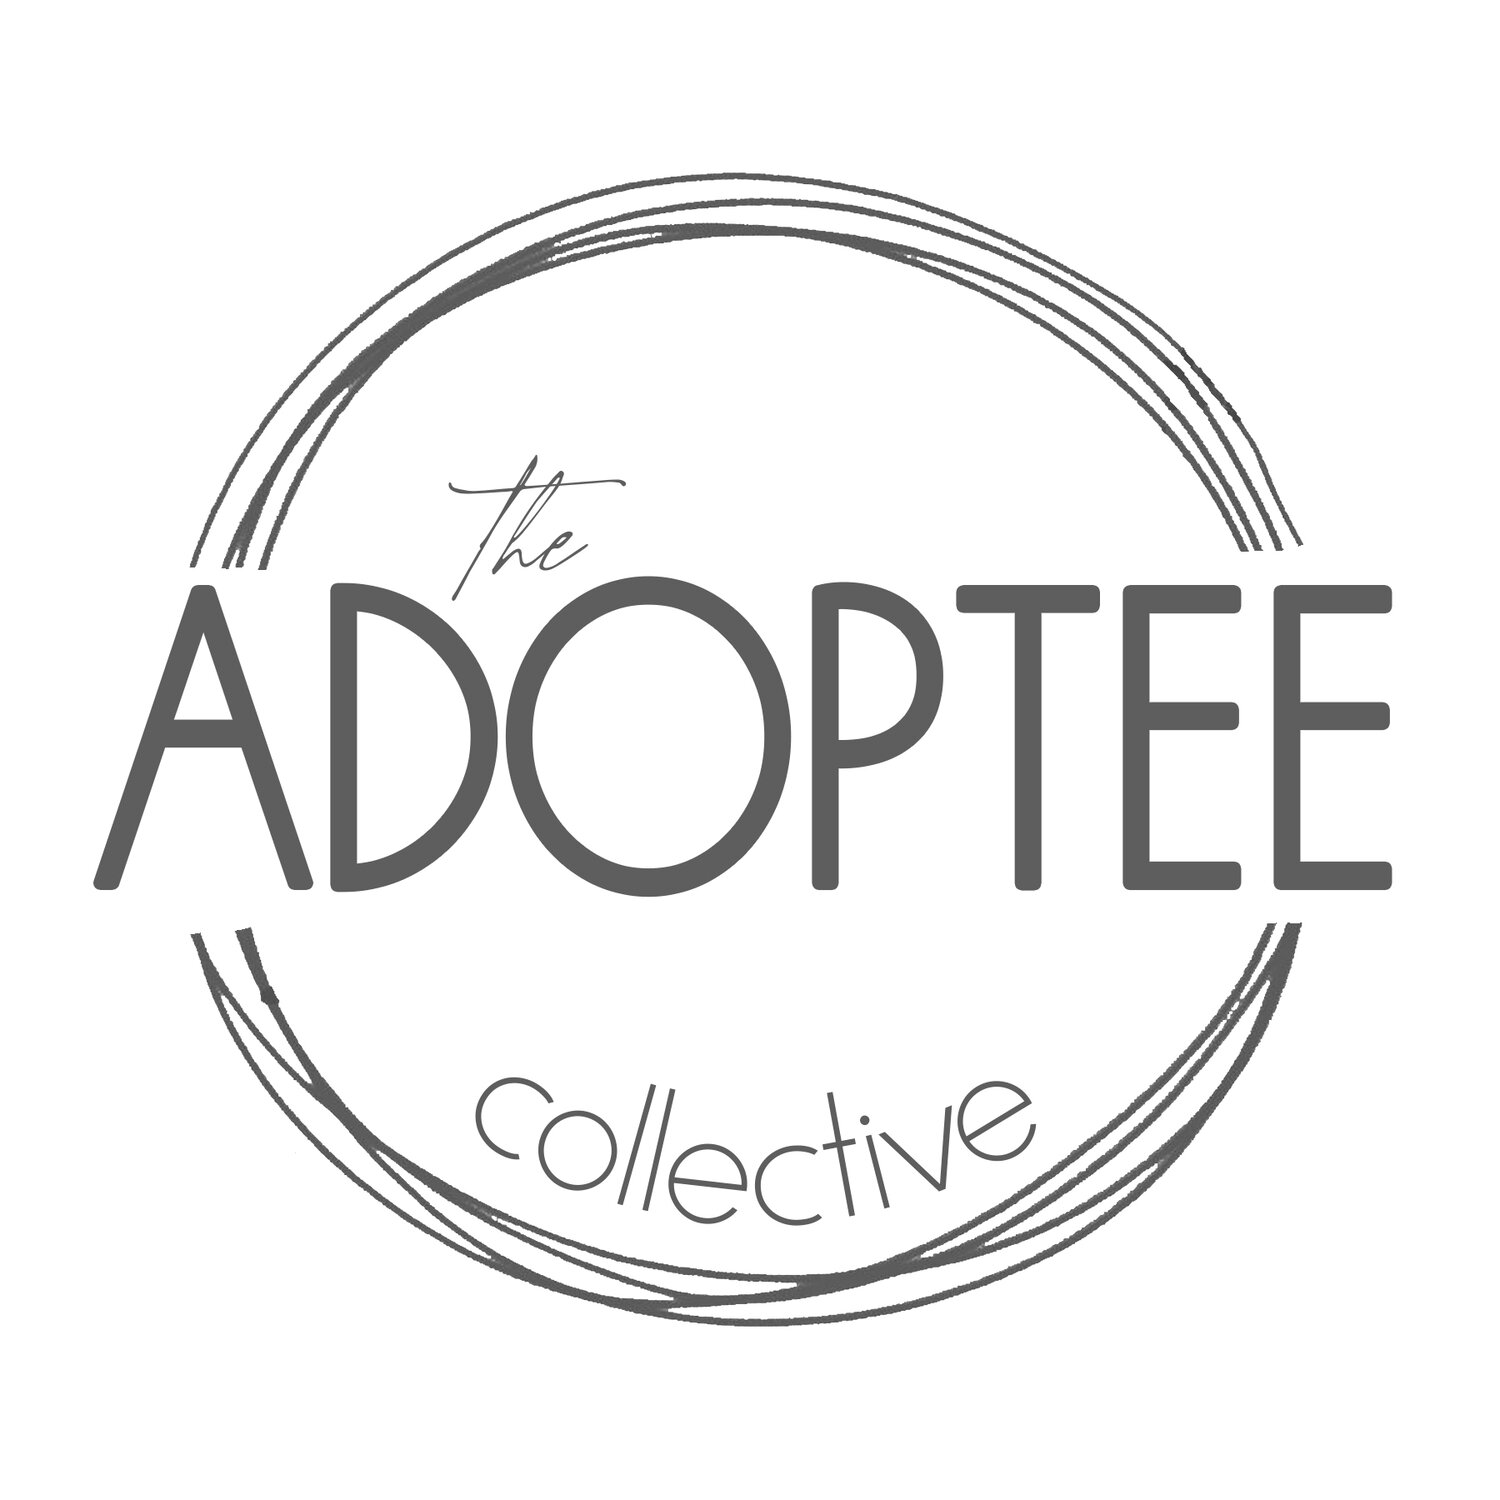 The Adoptee Collective